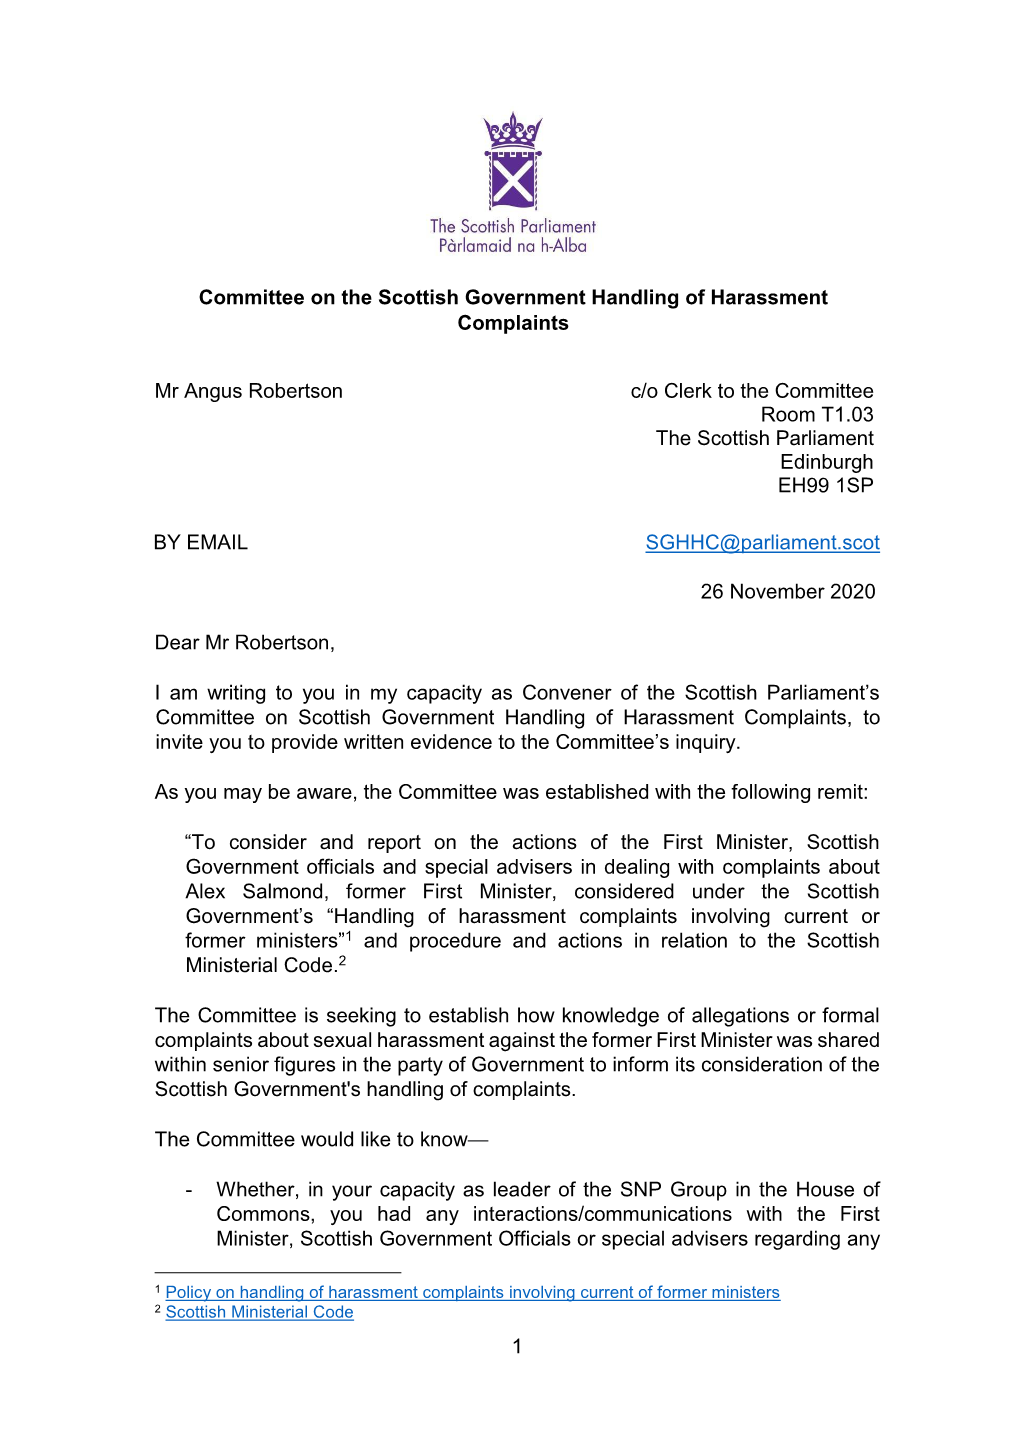 Letter from the Convener to Angus Robertson, 26